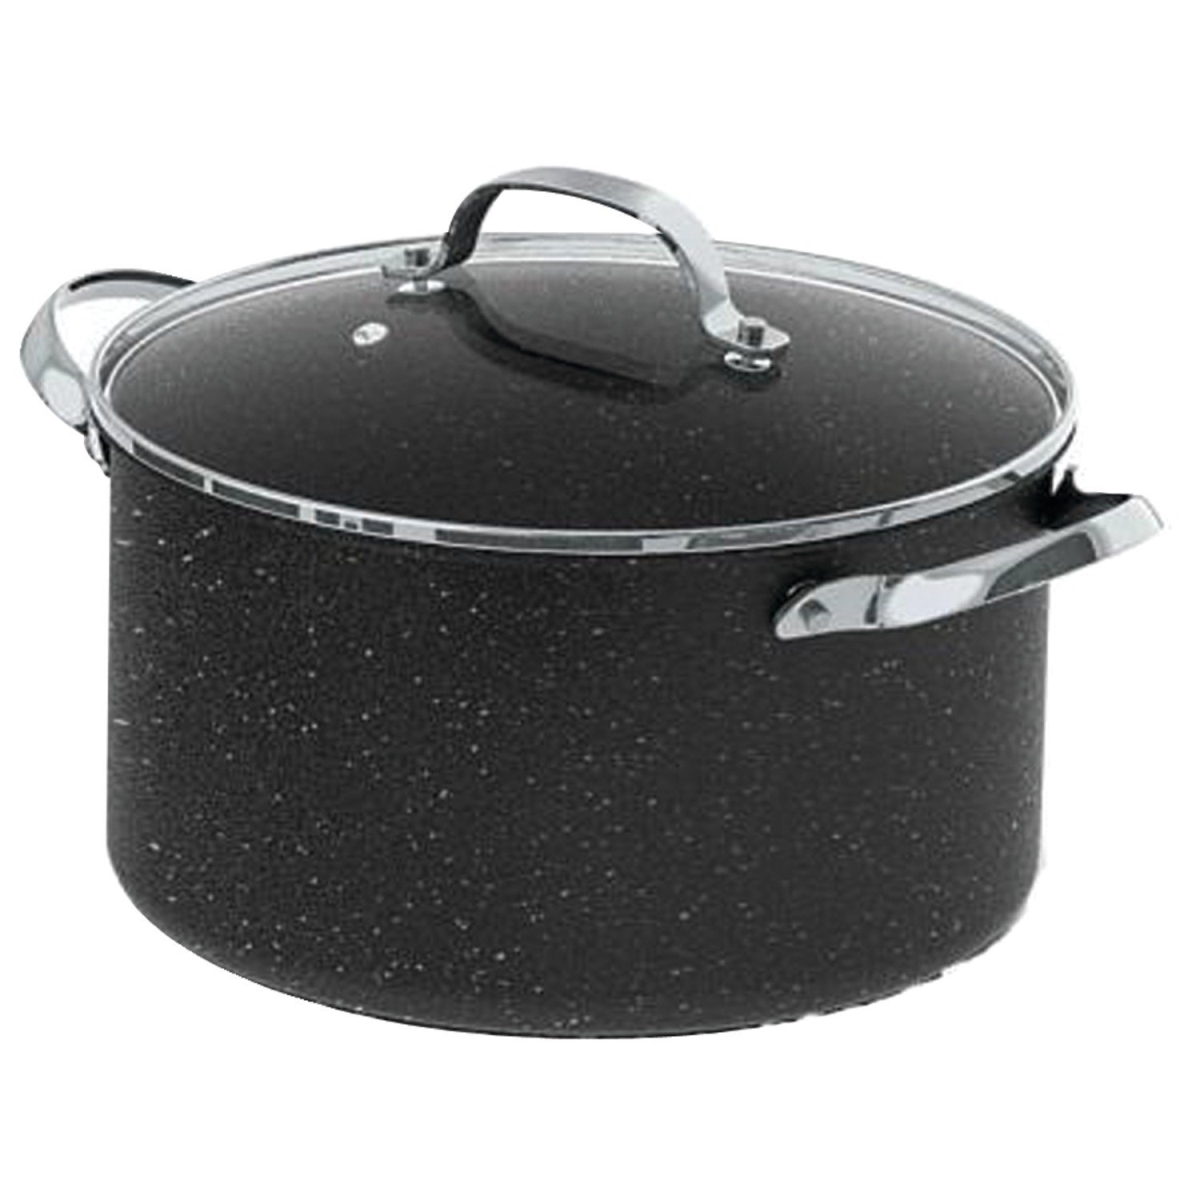 060317-002-0000 6-quart Saucepan With Glass Lid & Stainless Steel Handles